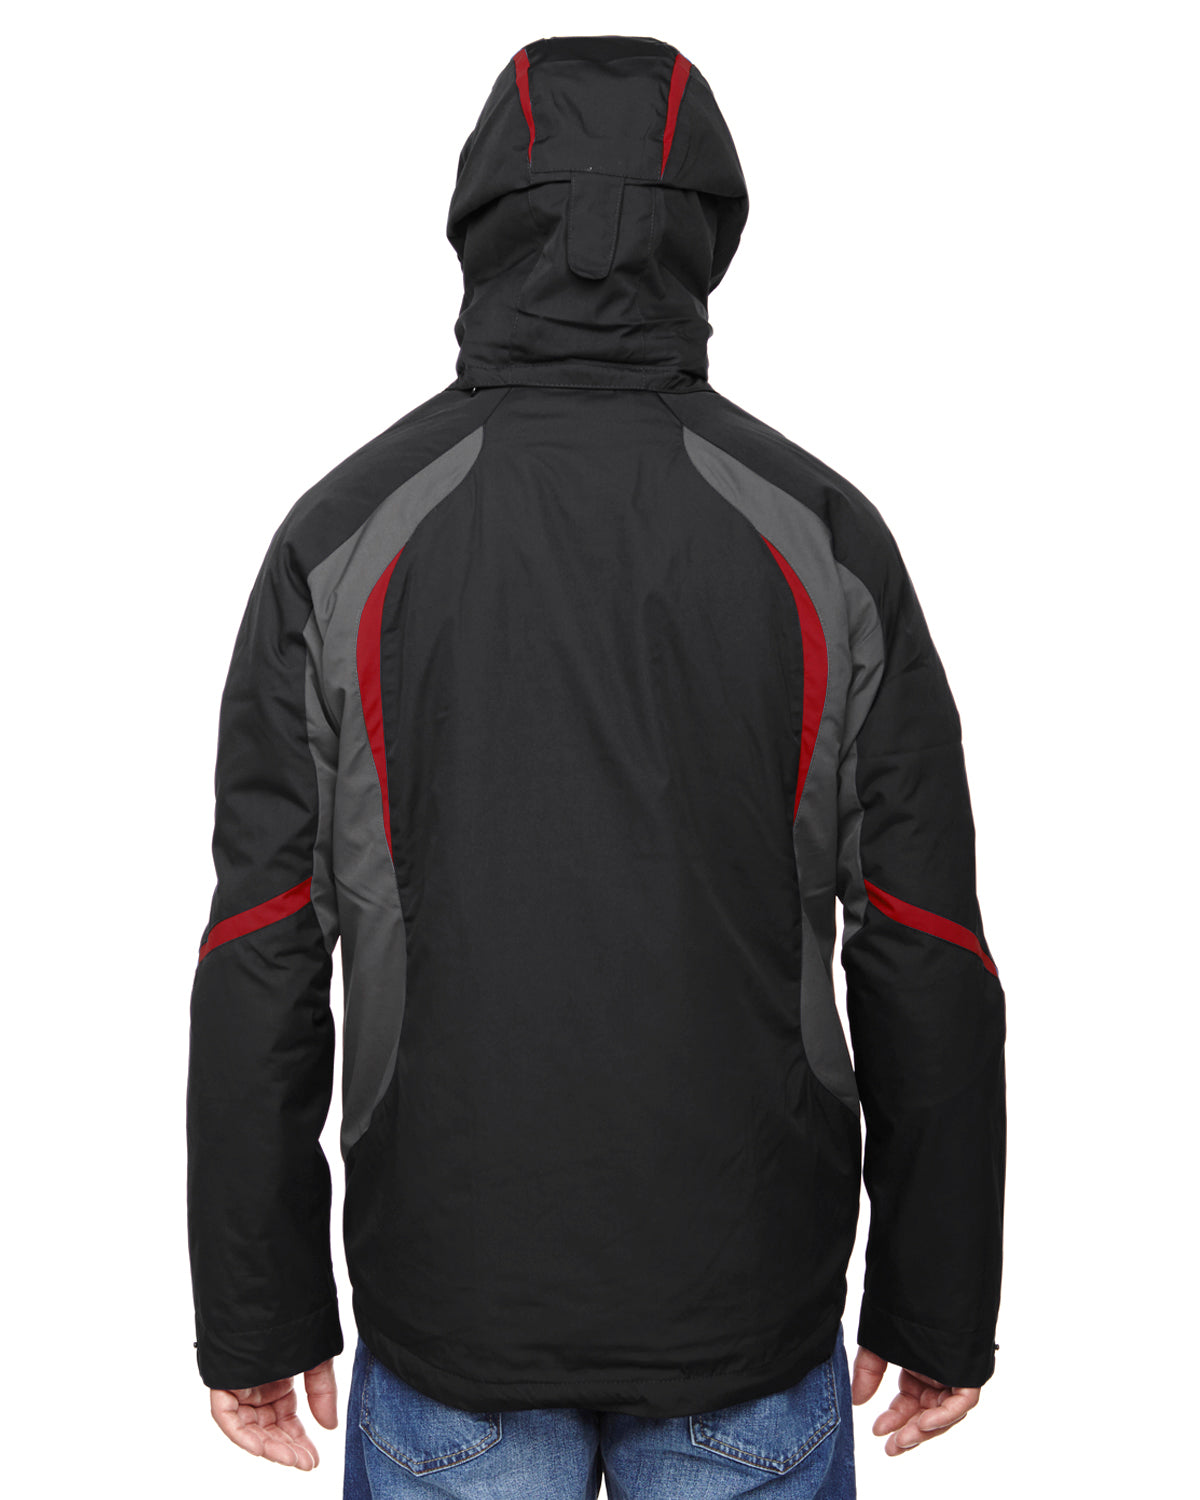 NORTH END MEN'S 3-IN-1 JACKET WITH INSULATED LINER